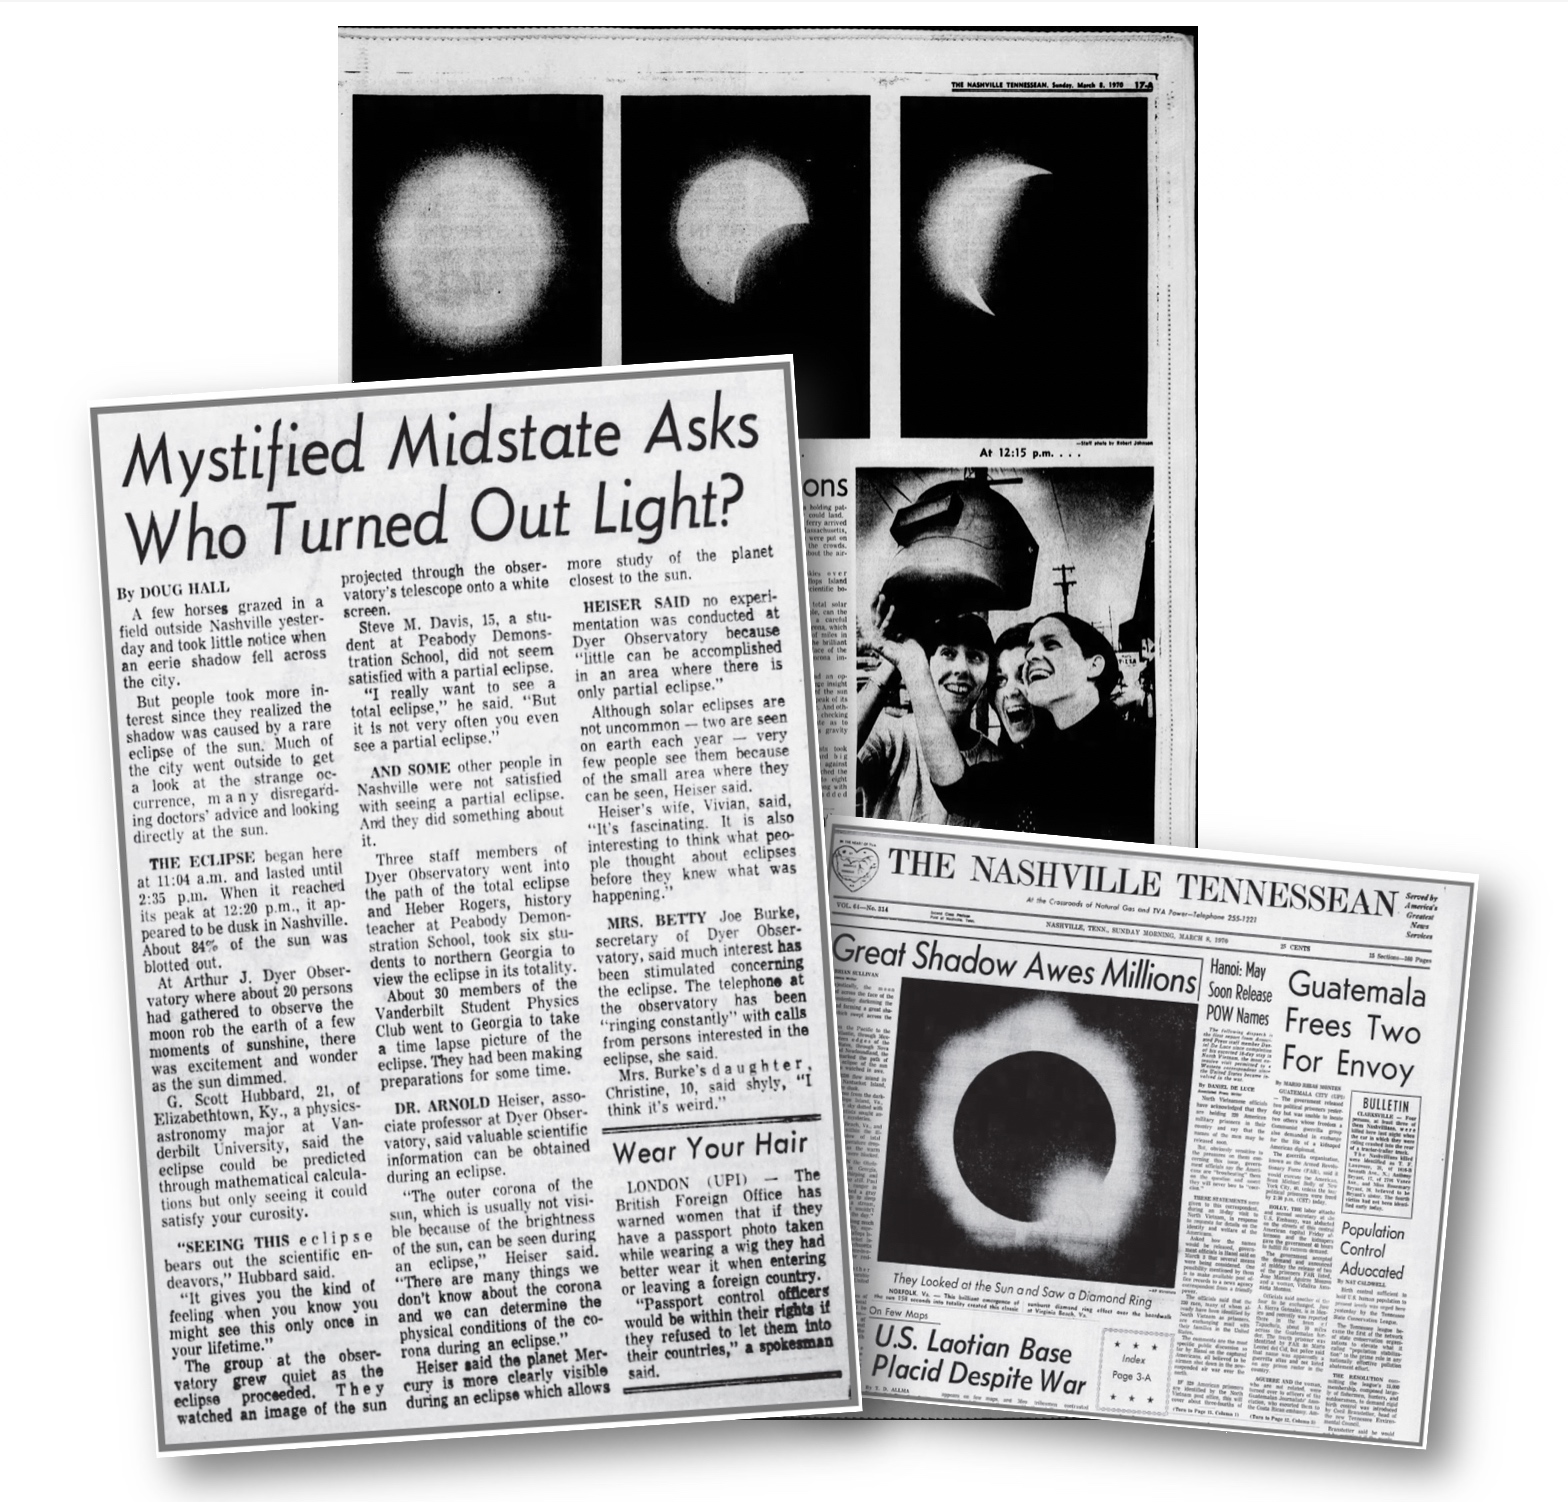 The Solar Eclipse of March 7, 1970